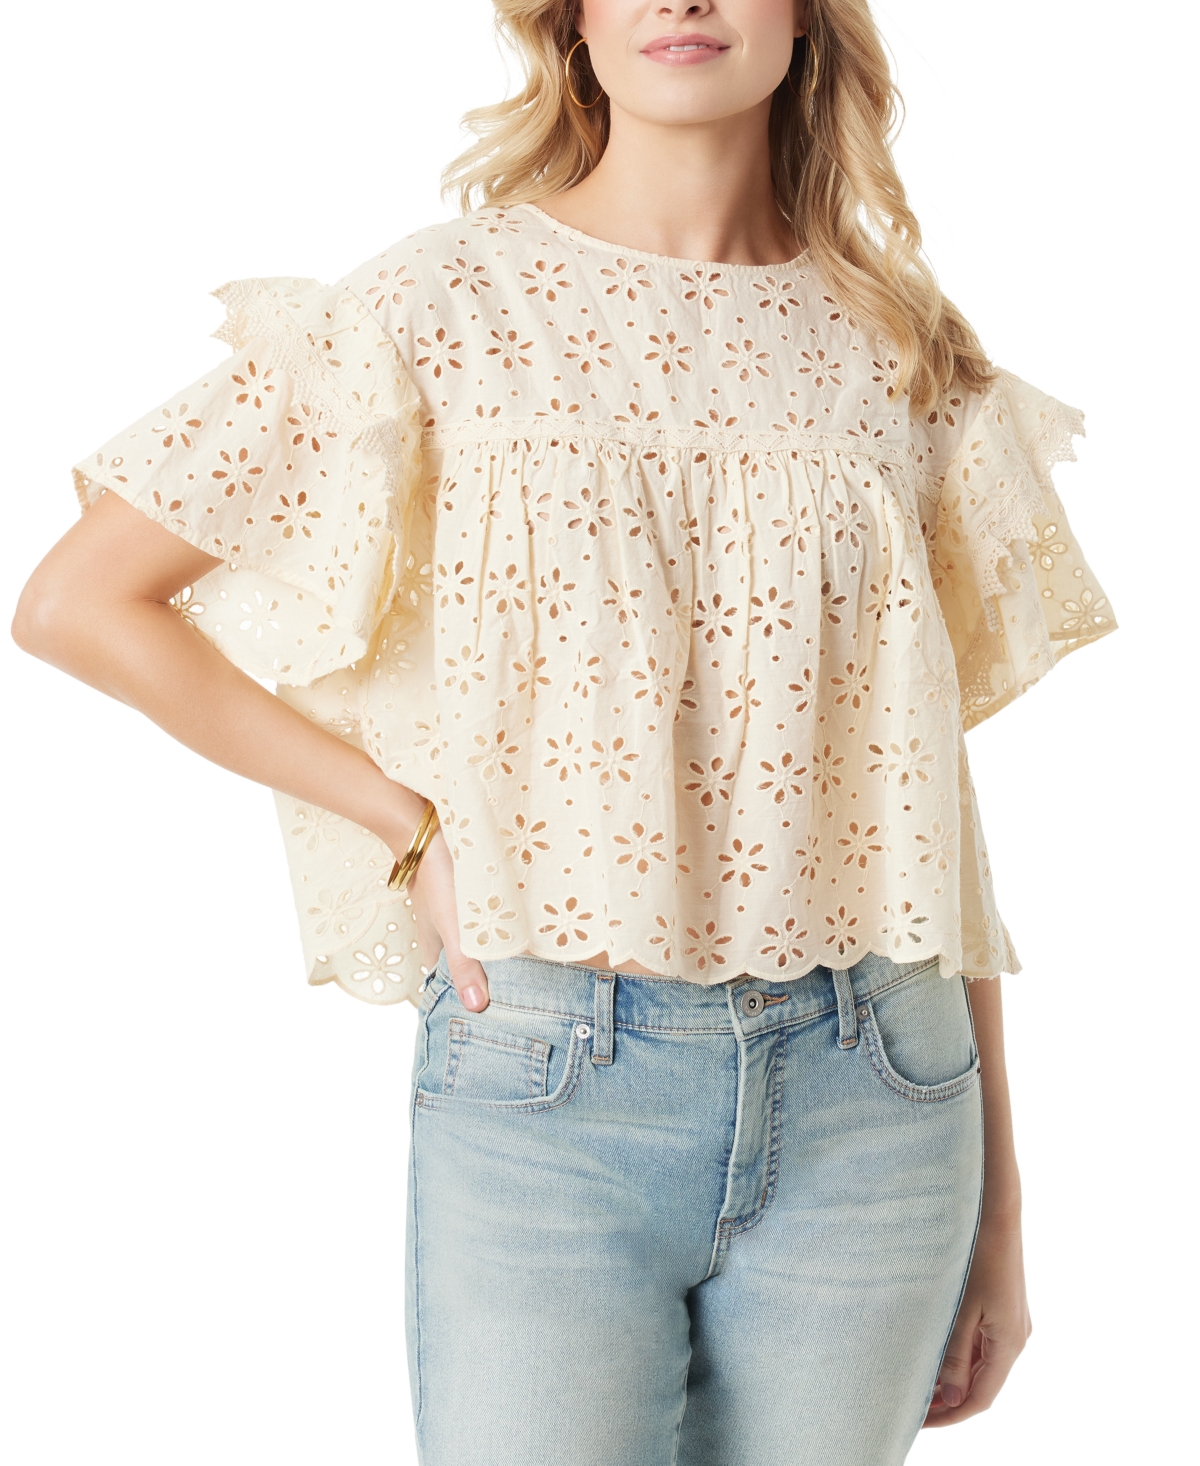 Women's Maja Cotton Eyelet-Embroidered Top - Parchment